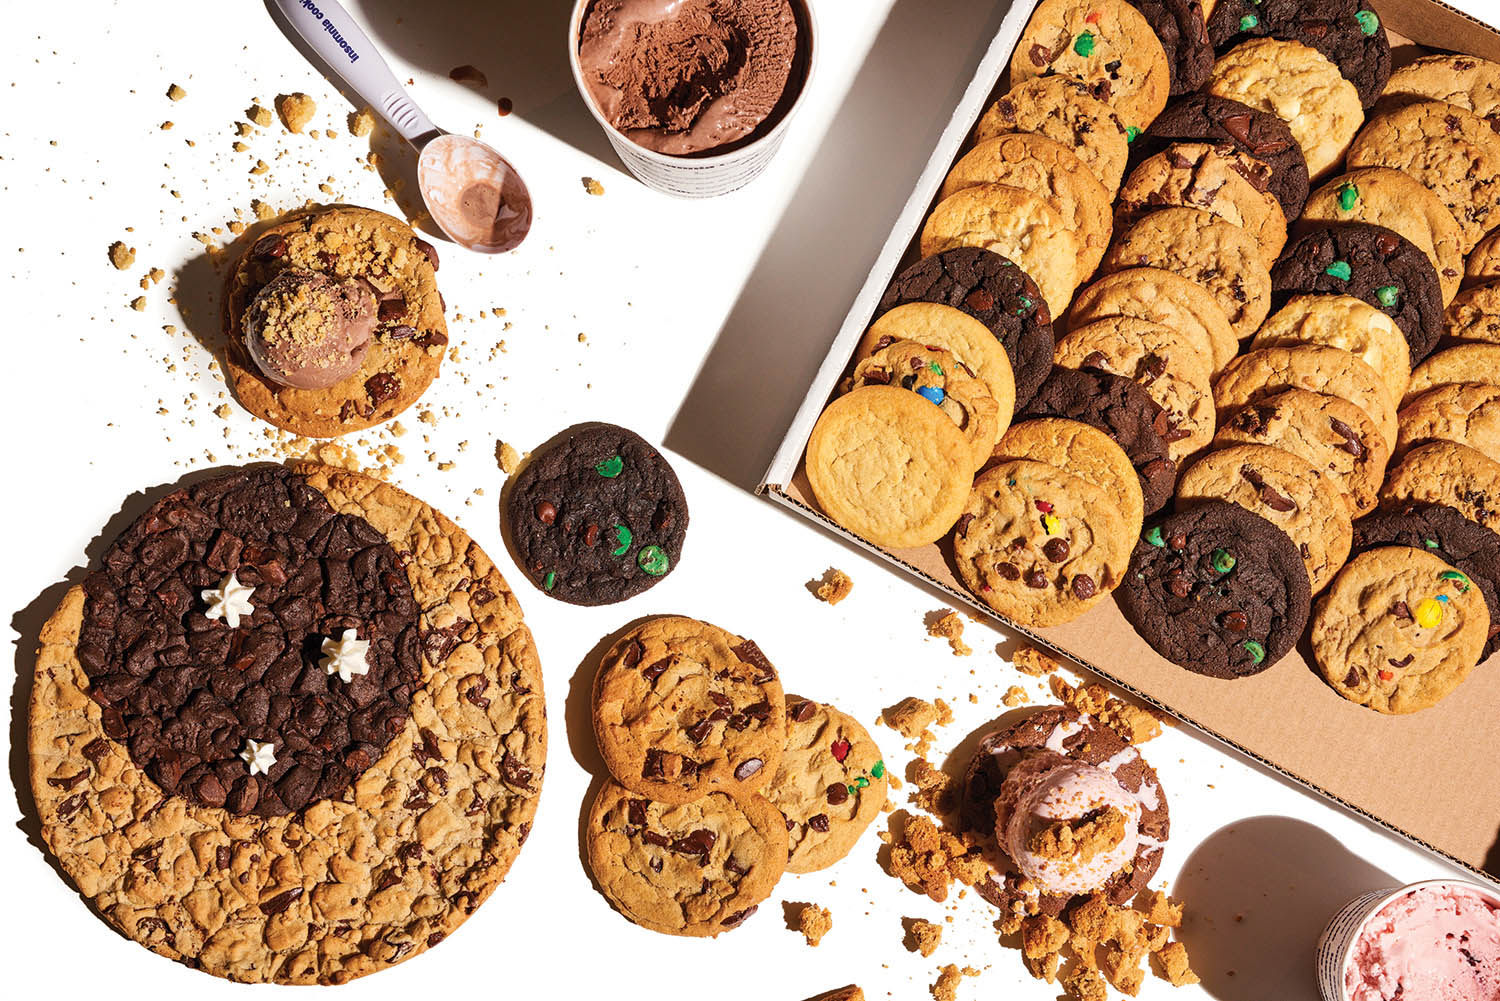 Satisfy cookie cravings late-night, via delivery